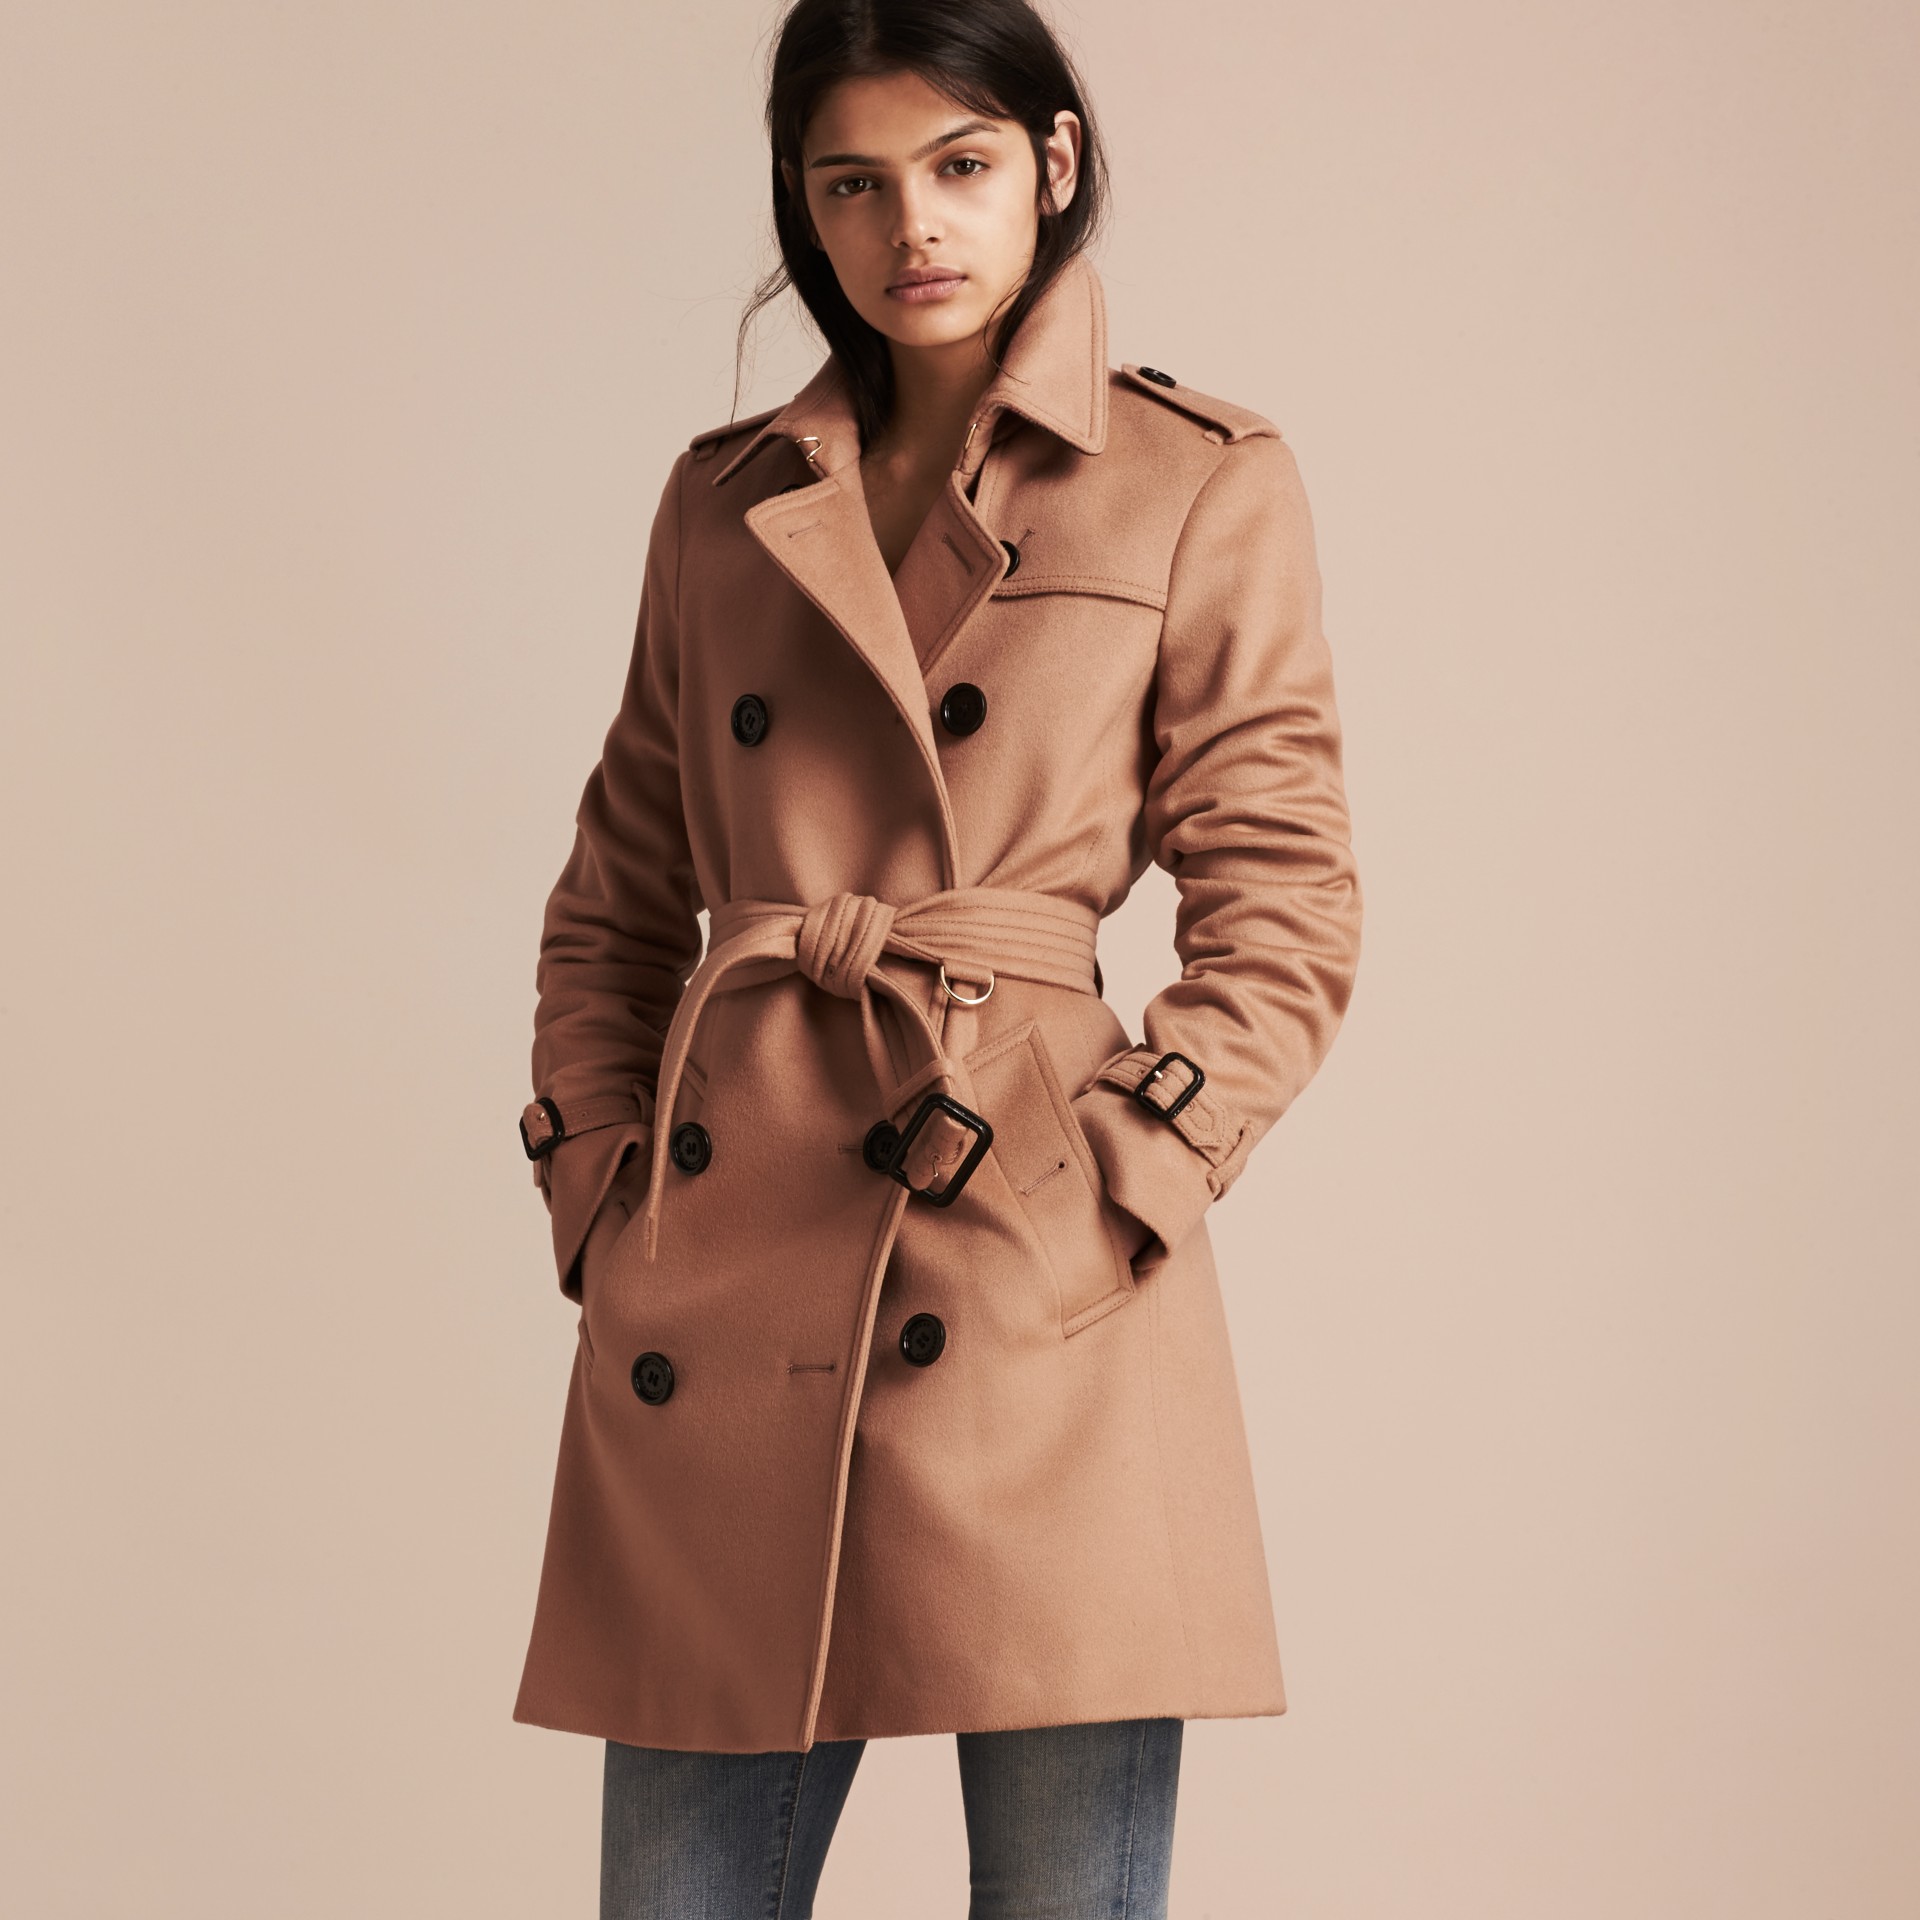 Wool Cashmere Trench Coat in Camel - Women | Burberry United States